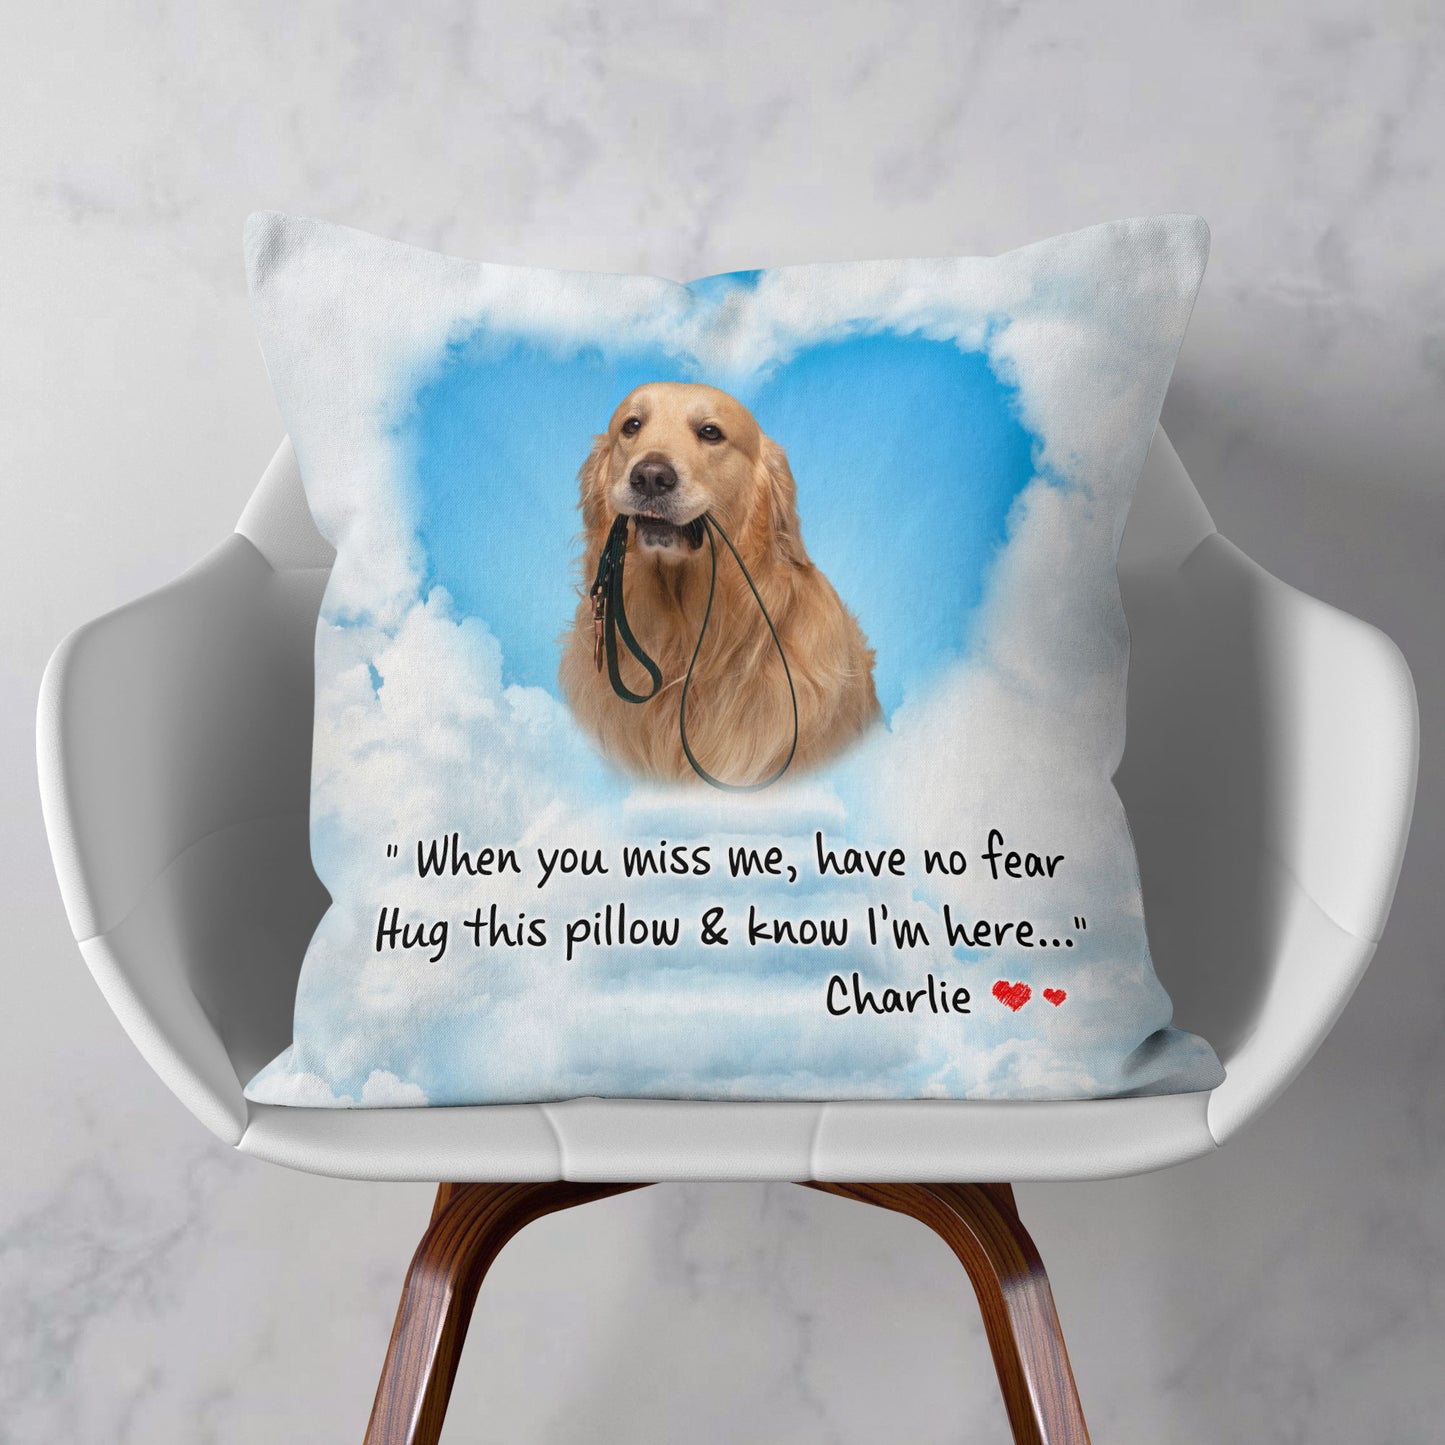 Hug This Pillow & Know I'm Here - Personalized Photo Pillow (Insert Included)